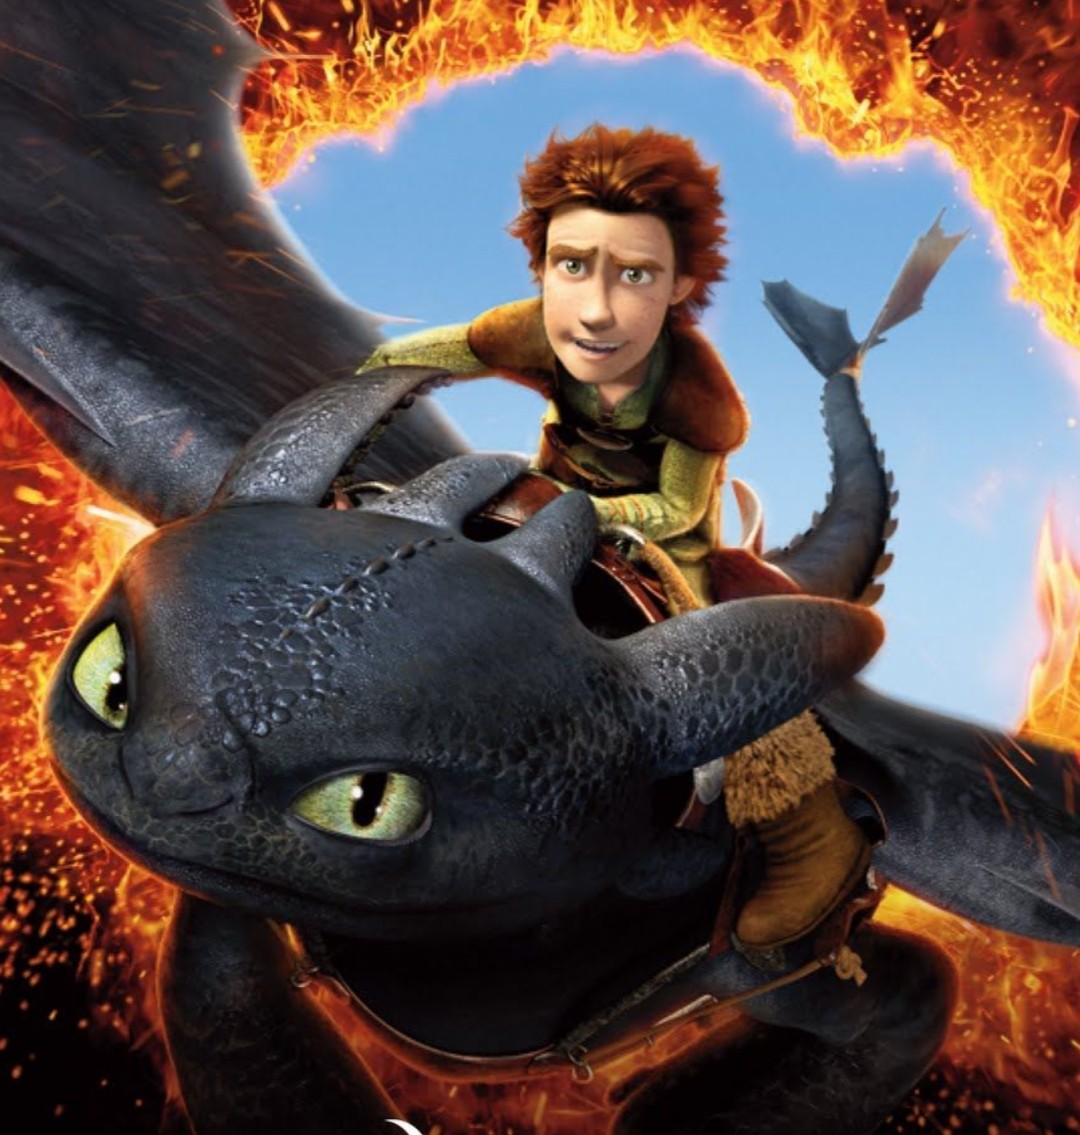  HOW TO TRAIN YOUR DRAGON